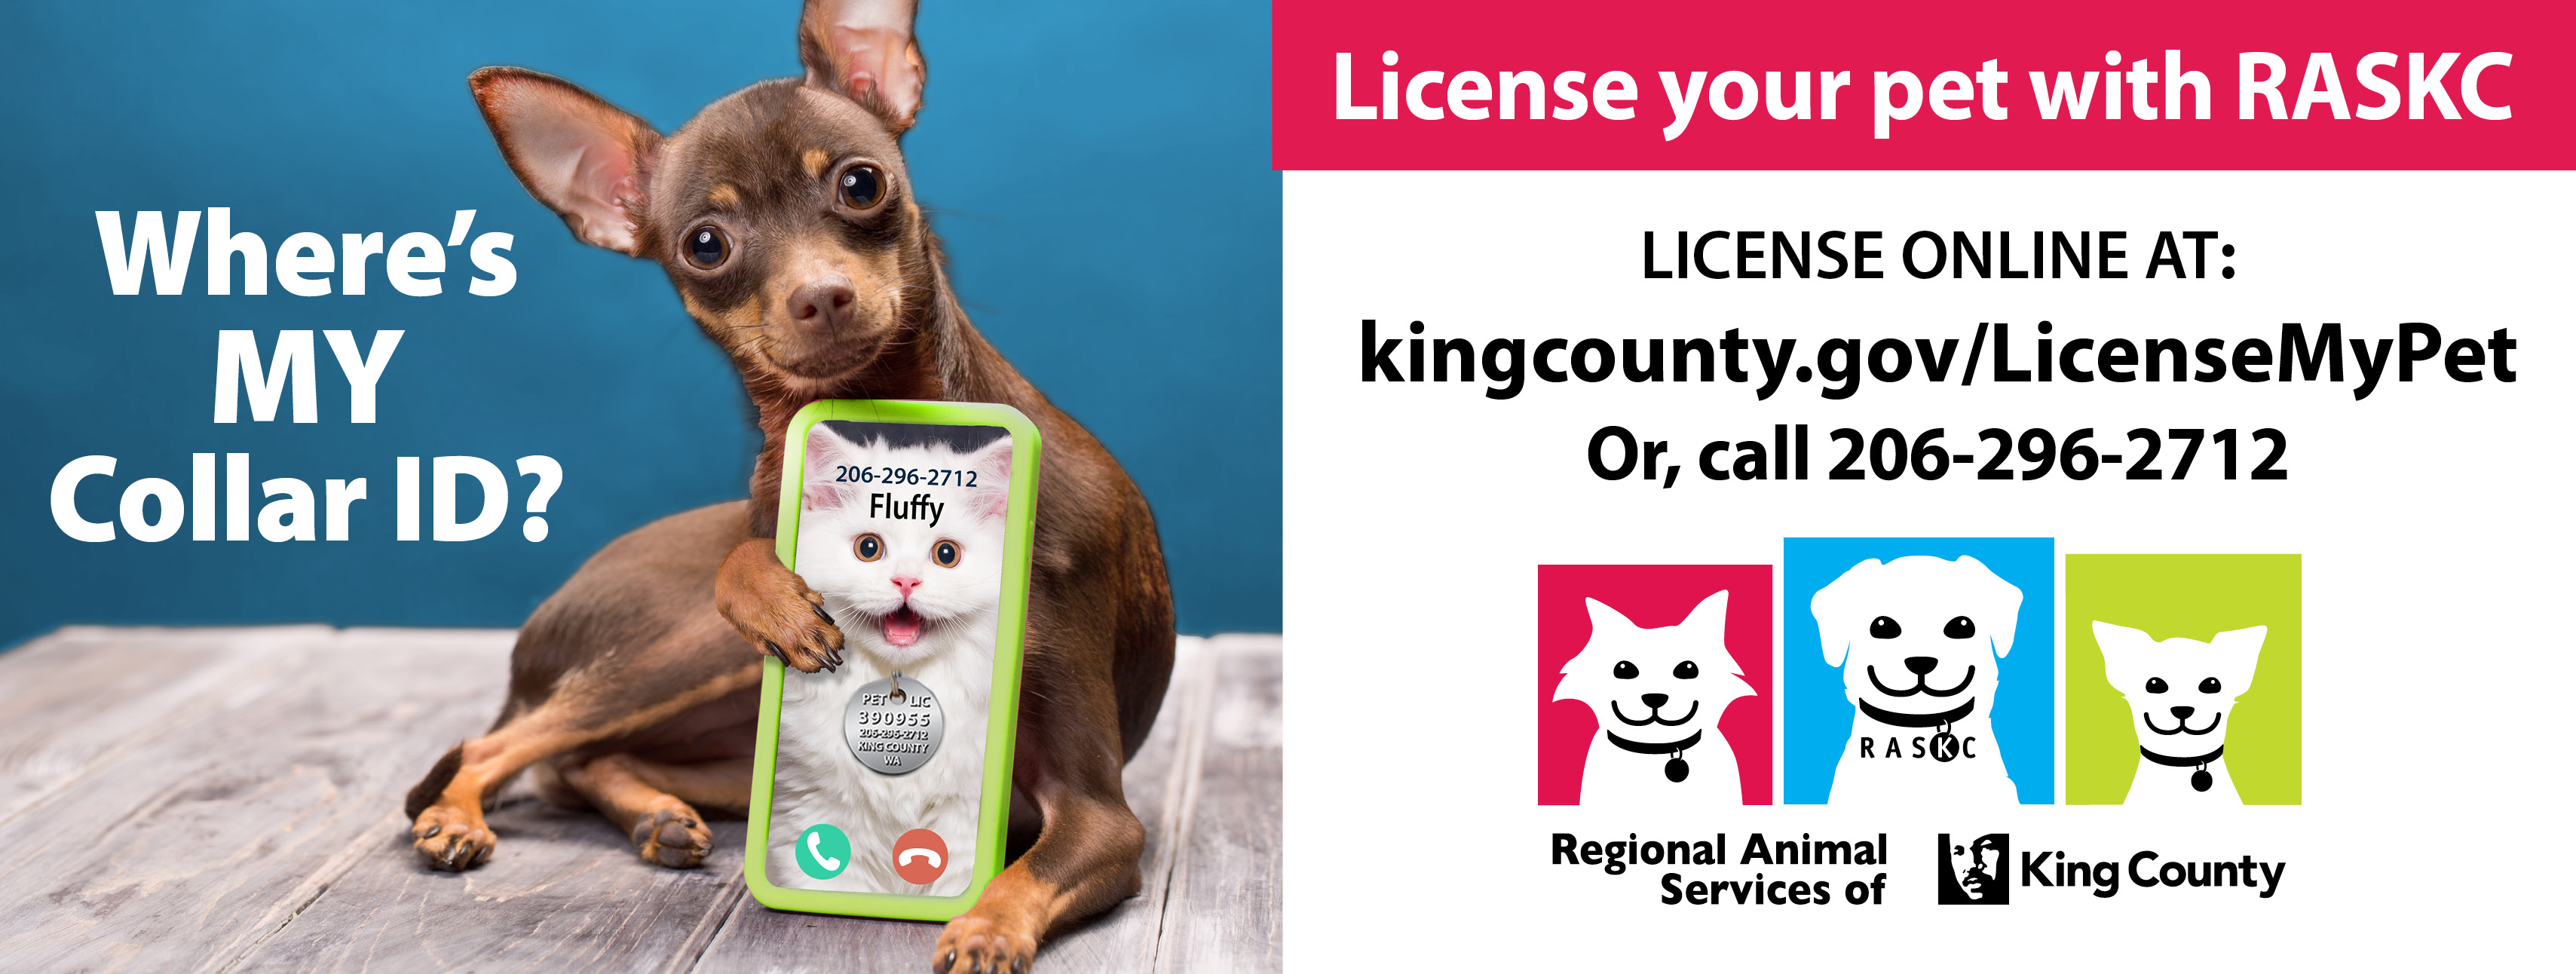 License your pet at kingcounty.gov/licensemypet or 206-296-2712